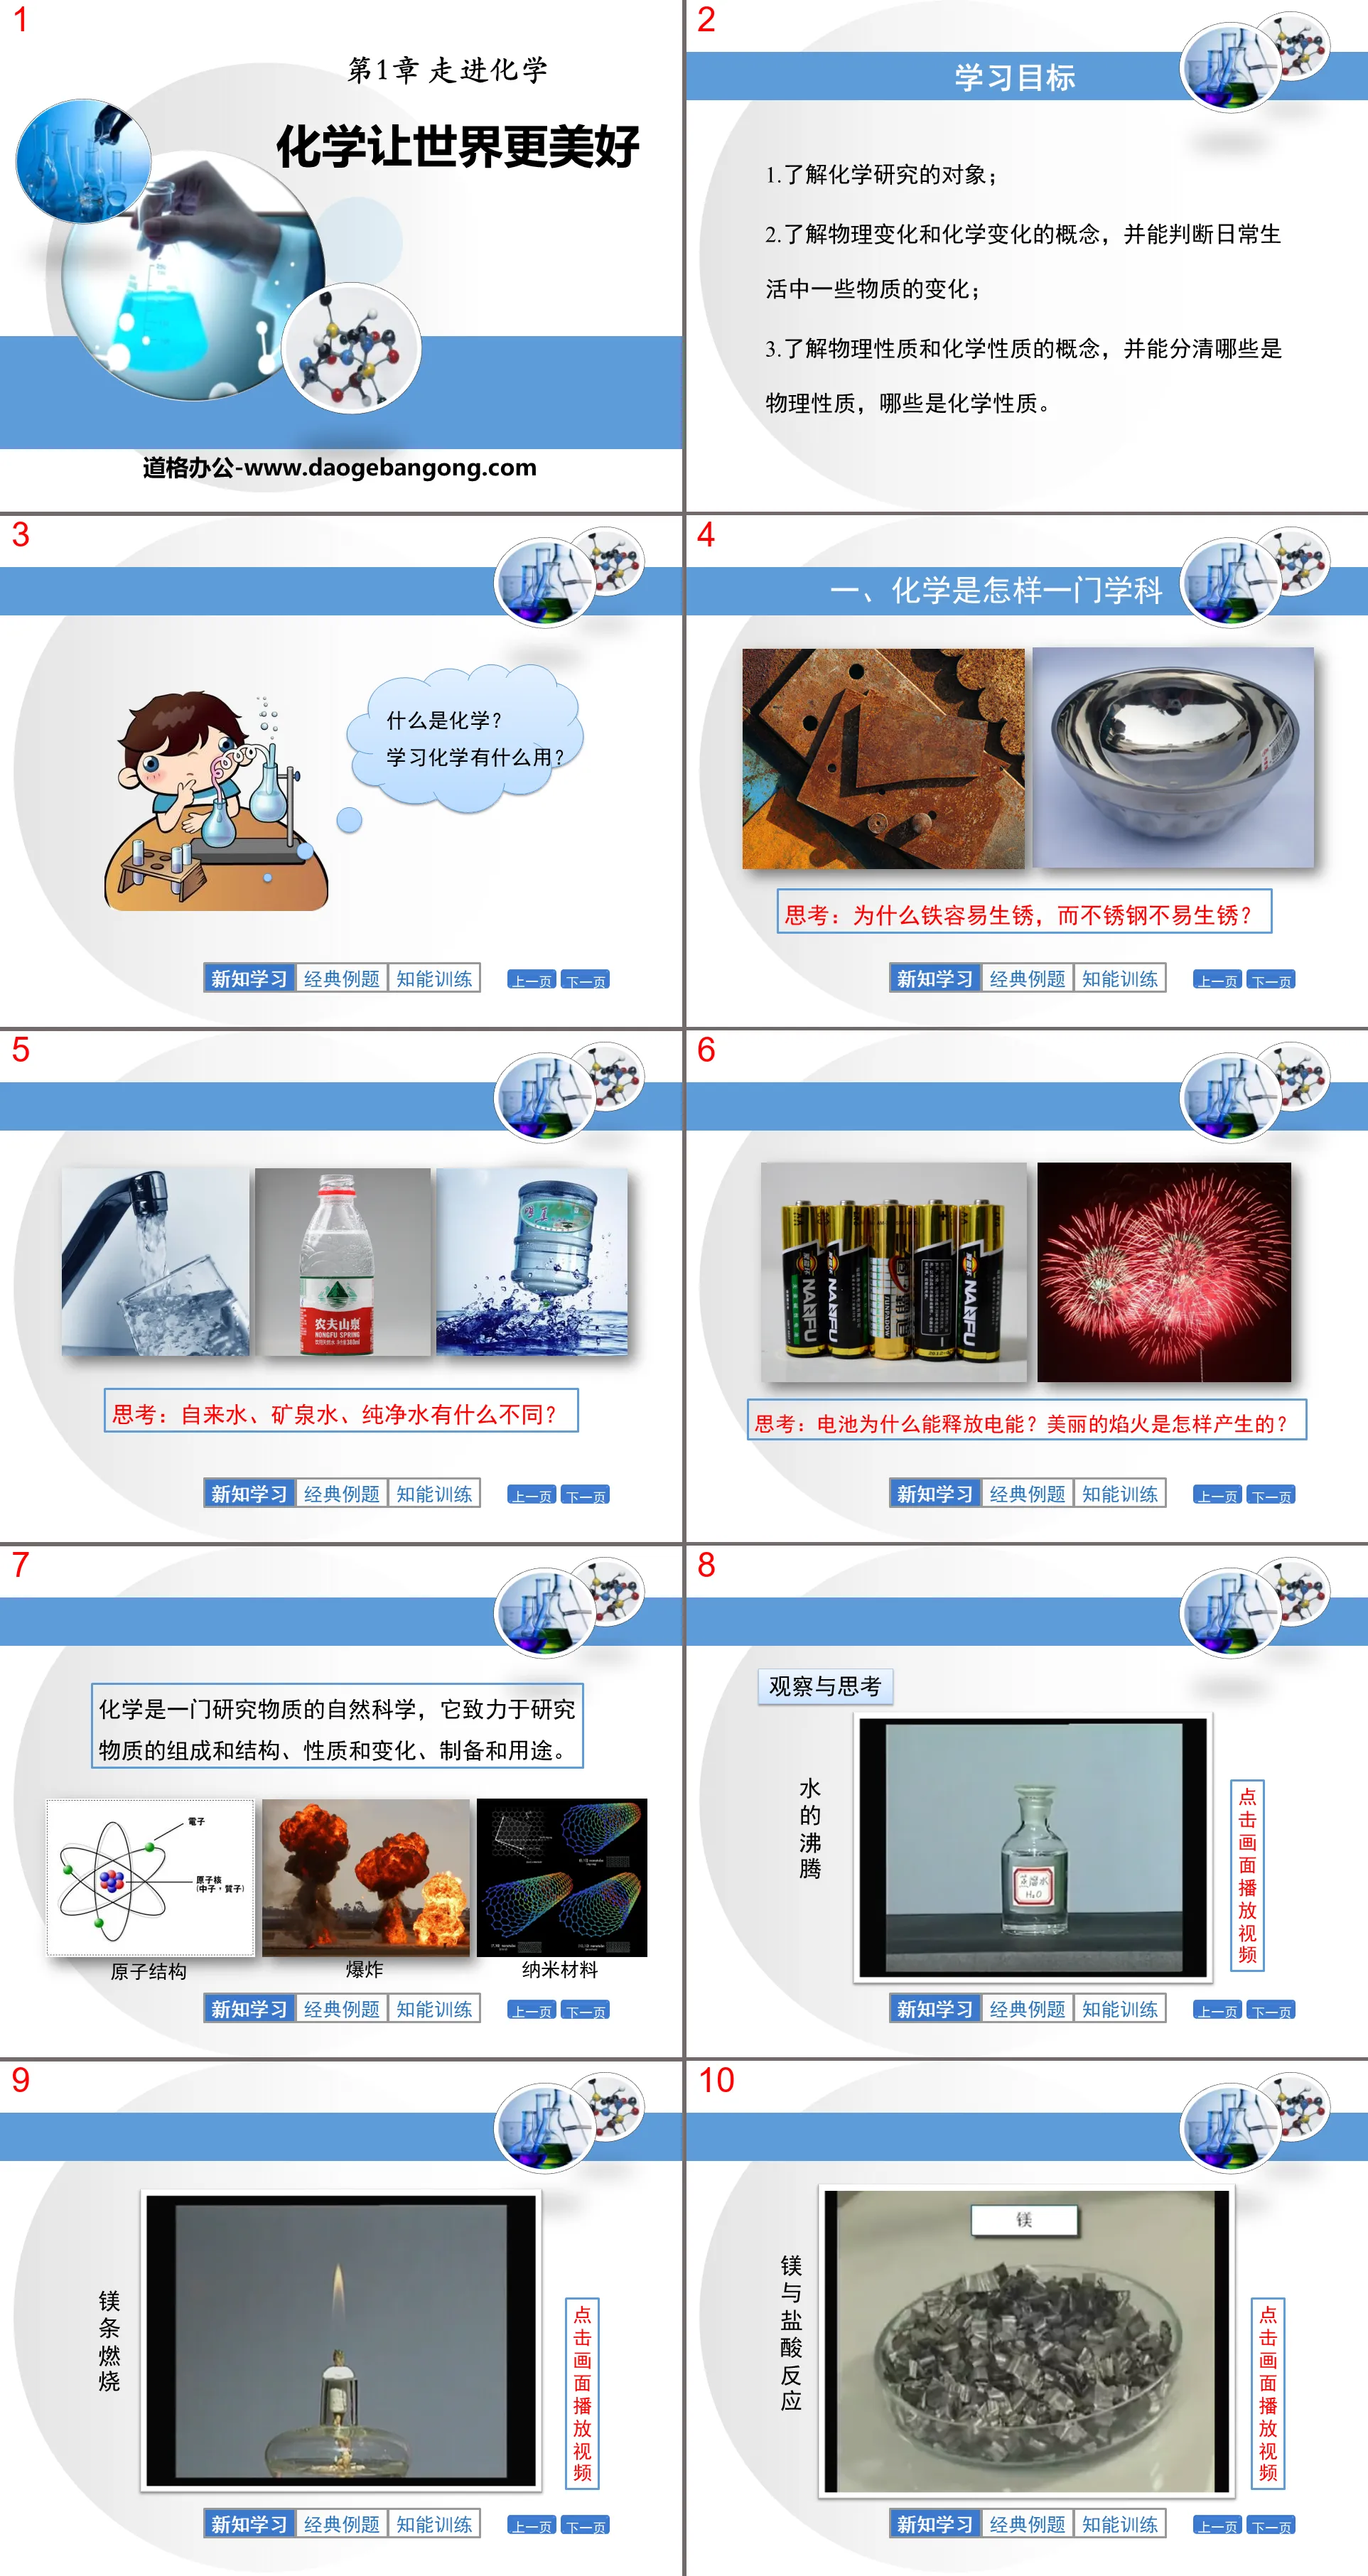 "Chemistry makes the world a better place" into the chemistry PPT courseware